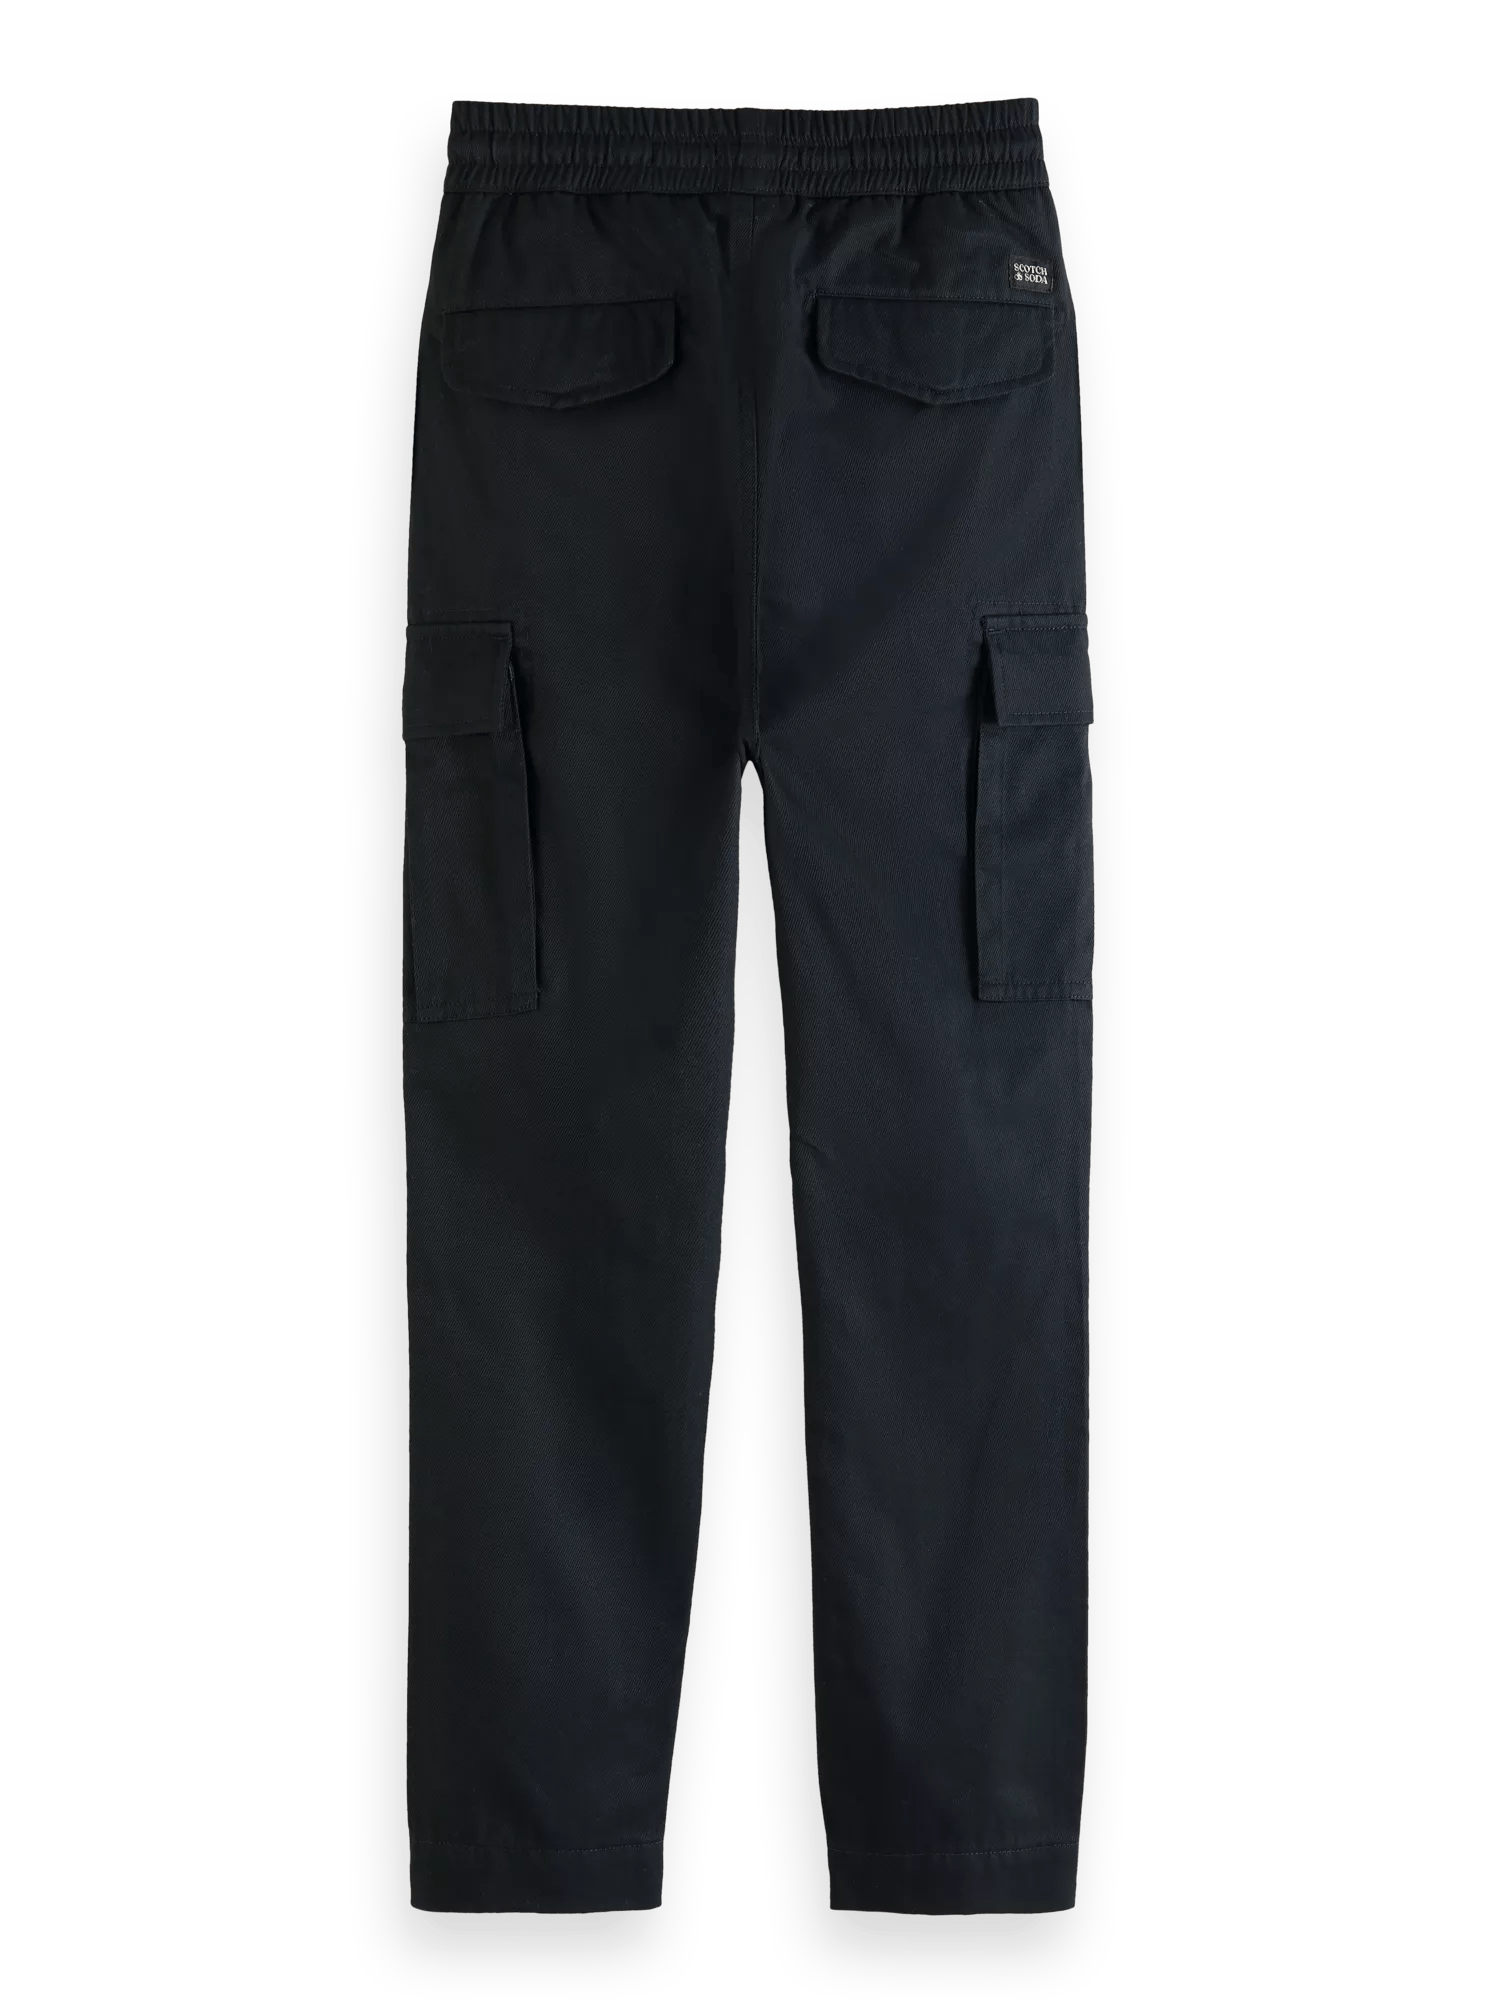 Scotch & Soda Loose tapered fit - Organic Cotton cargo pants BCK